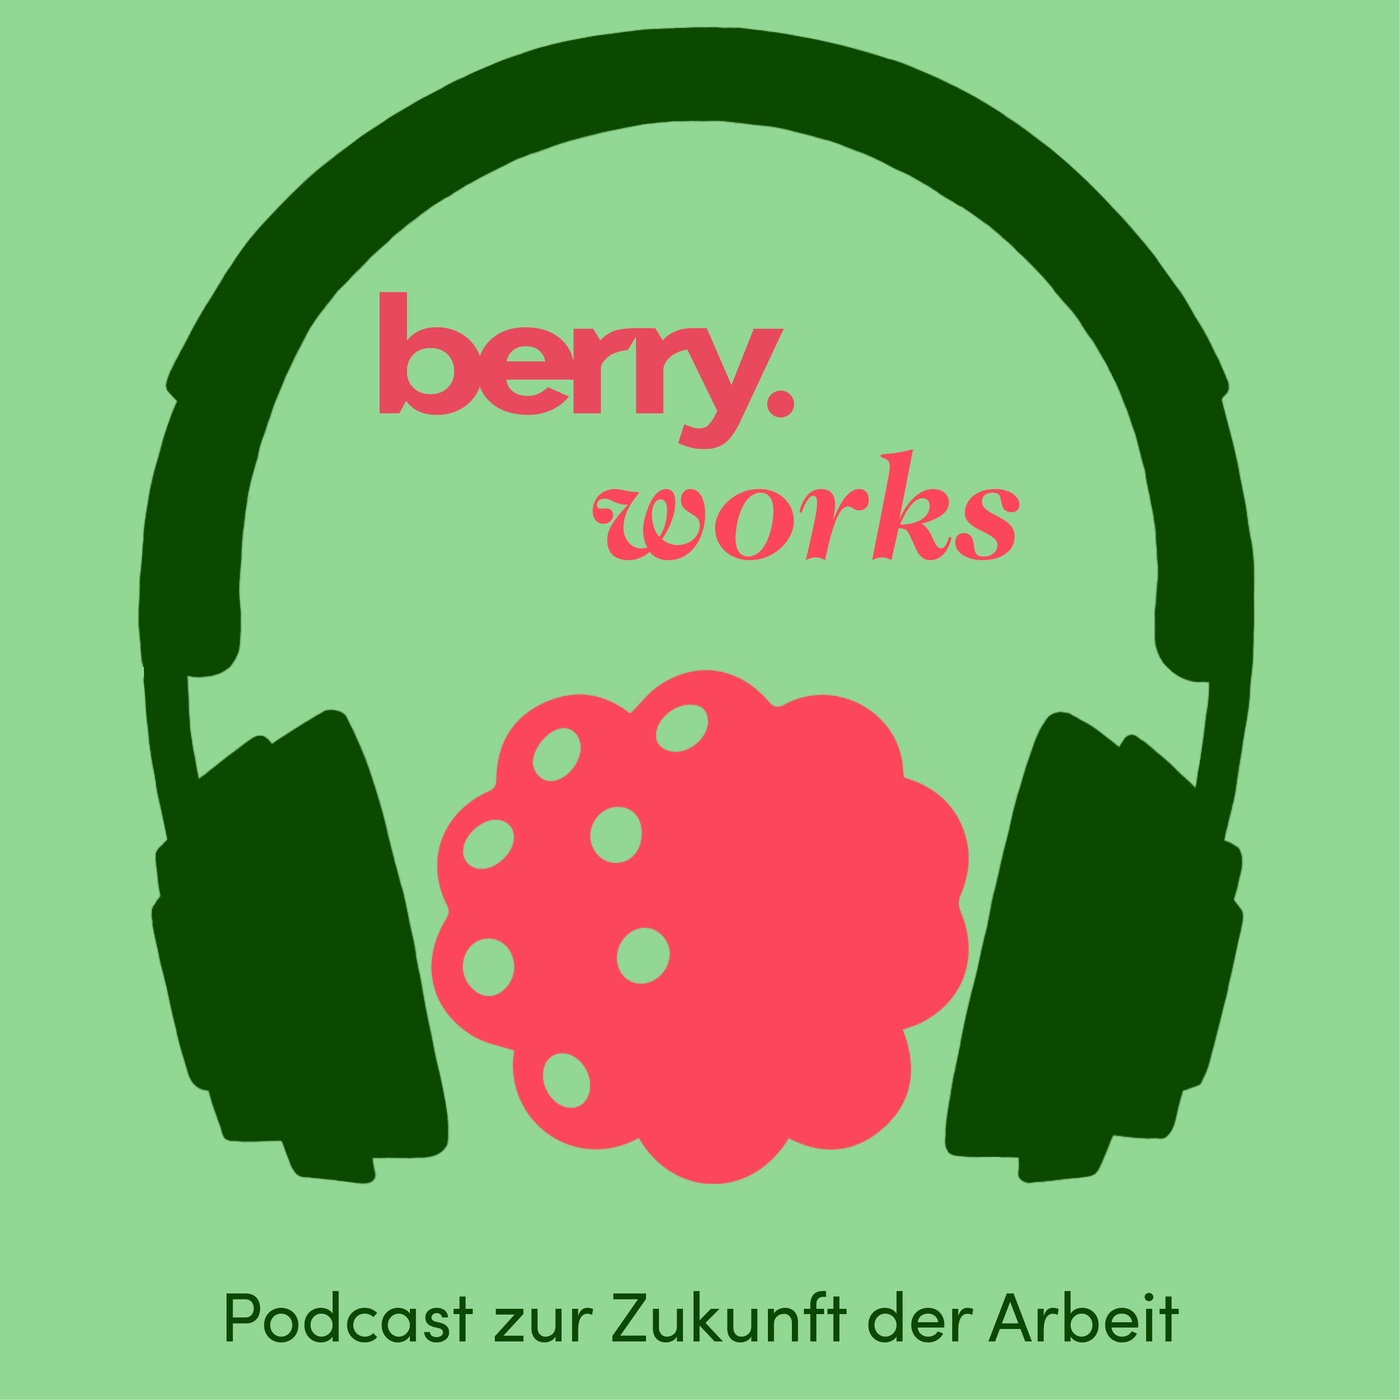 Podcast-Trailer «berry works»